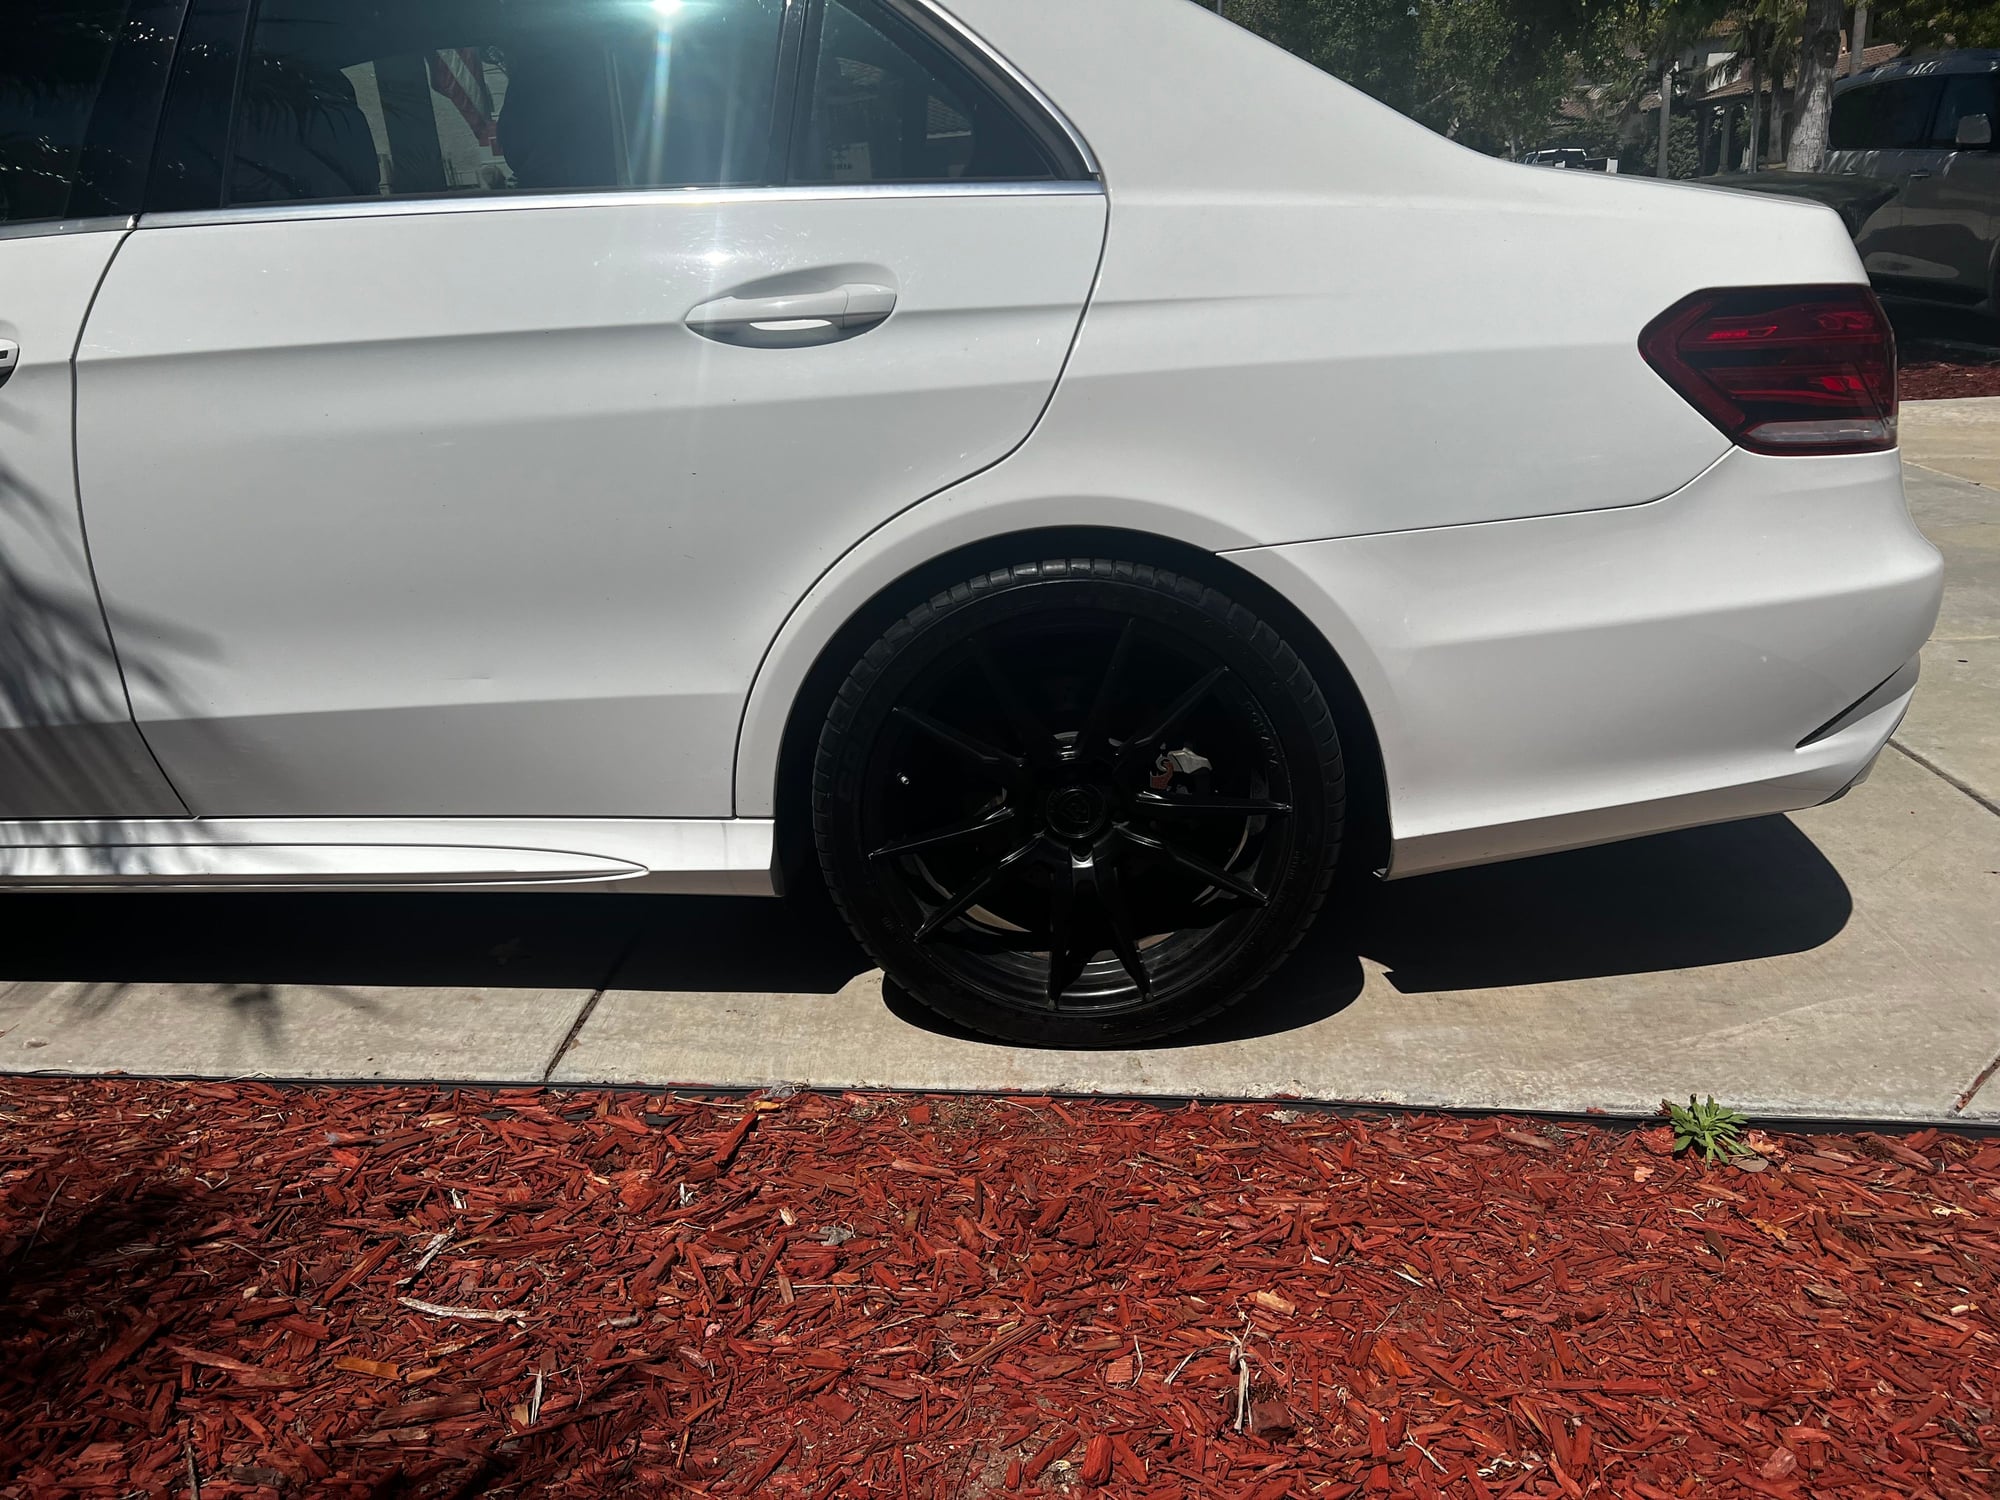 Wheels and Tires/Axles - Rohana RF2 Black Wheels & Tires/TPMS for E-Class & others - Used - 2010 to 2023 Mercedes-Benz E350 - Oxnard, CA 93035, United States